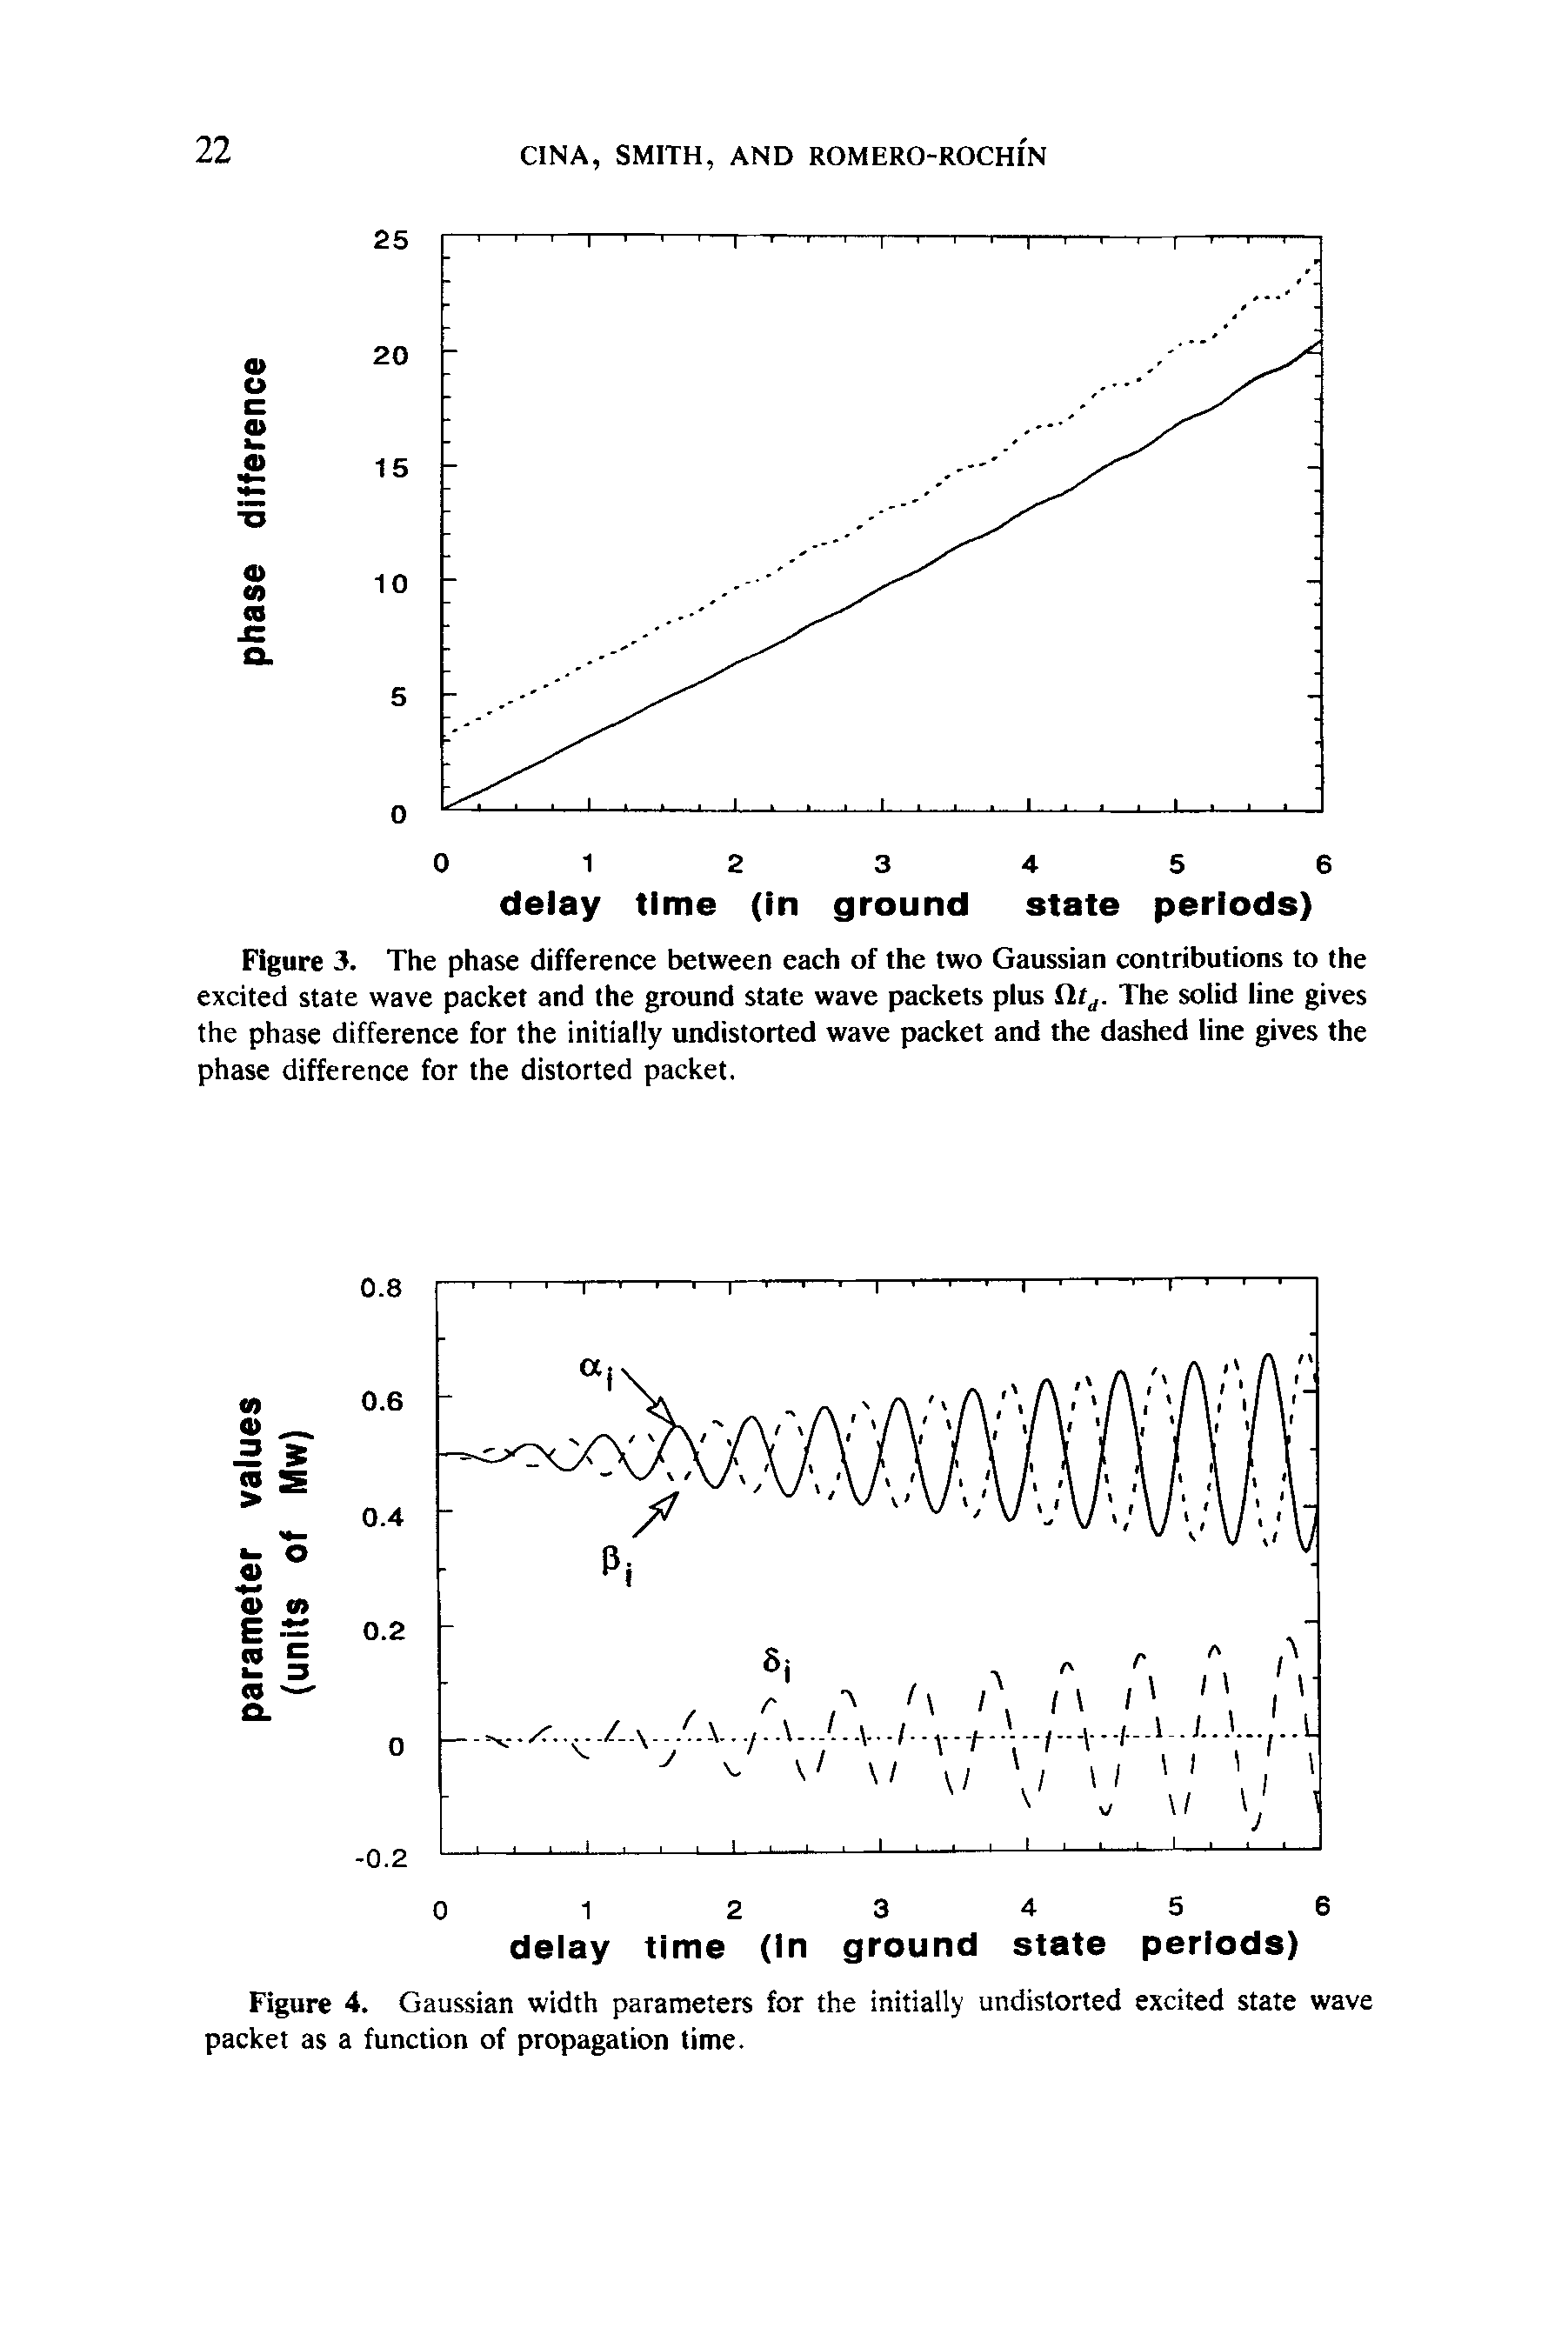 Figure 3. The phase difference between each of the two Gaussian contributions to the excited state wave packet and the ground state wave packets plus fltj. The solid line gives the phase difference for the initially undistorted wave packet and the dashed line gives the phase difference for the distorted packet.